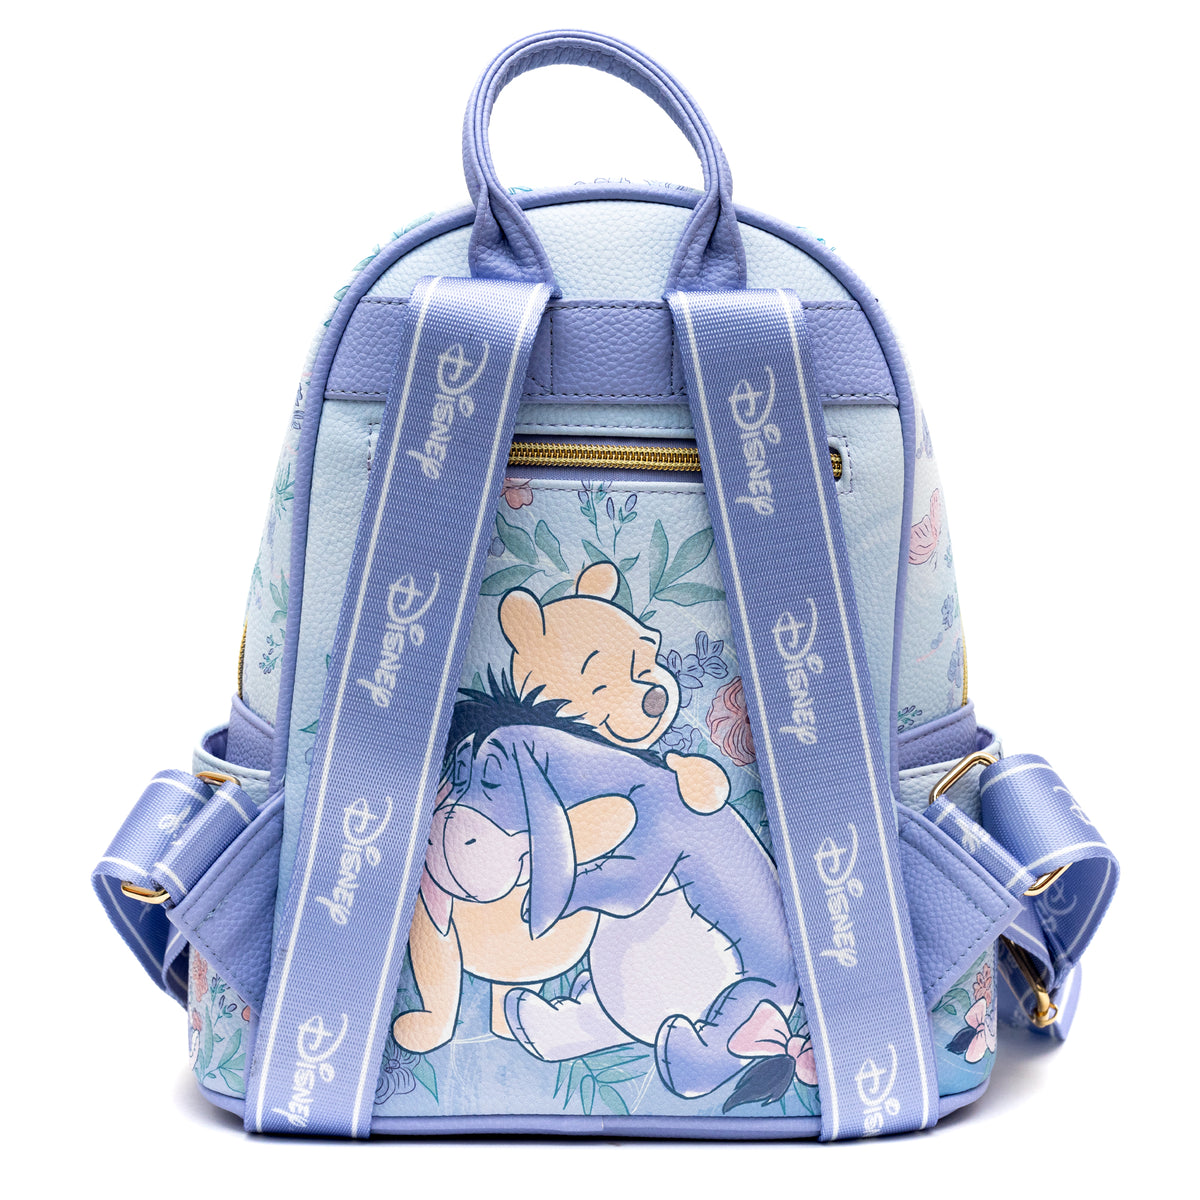 Disney Mini Backpack Winnie the Pooh Eeyore and Pooh Limited Edition